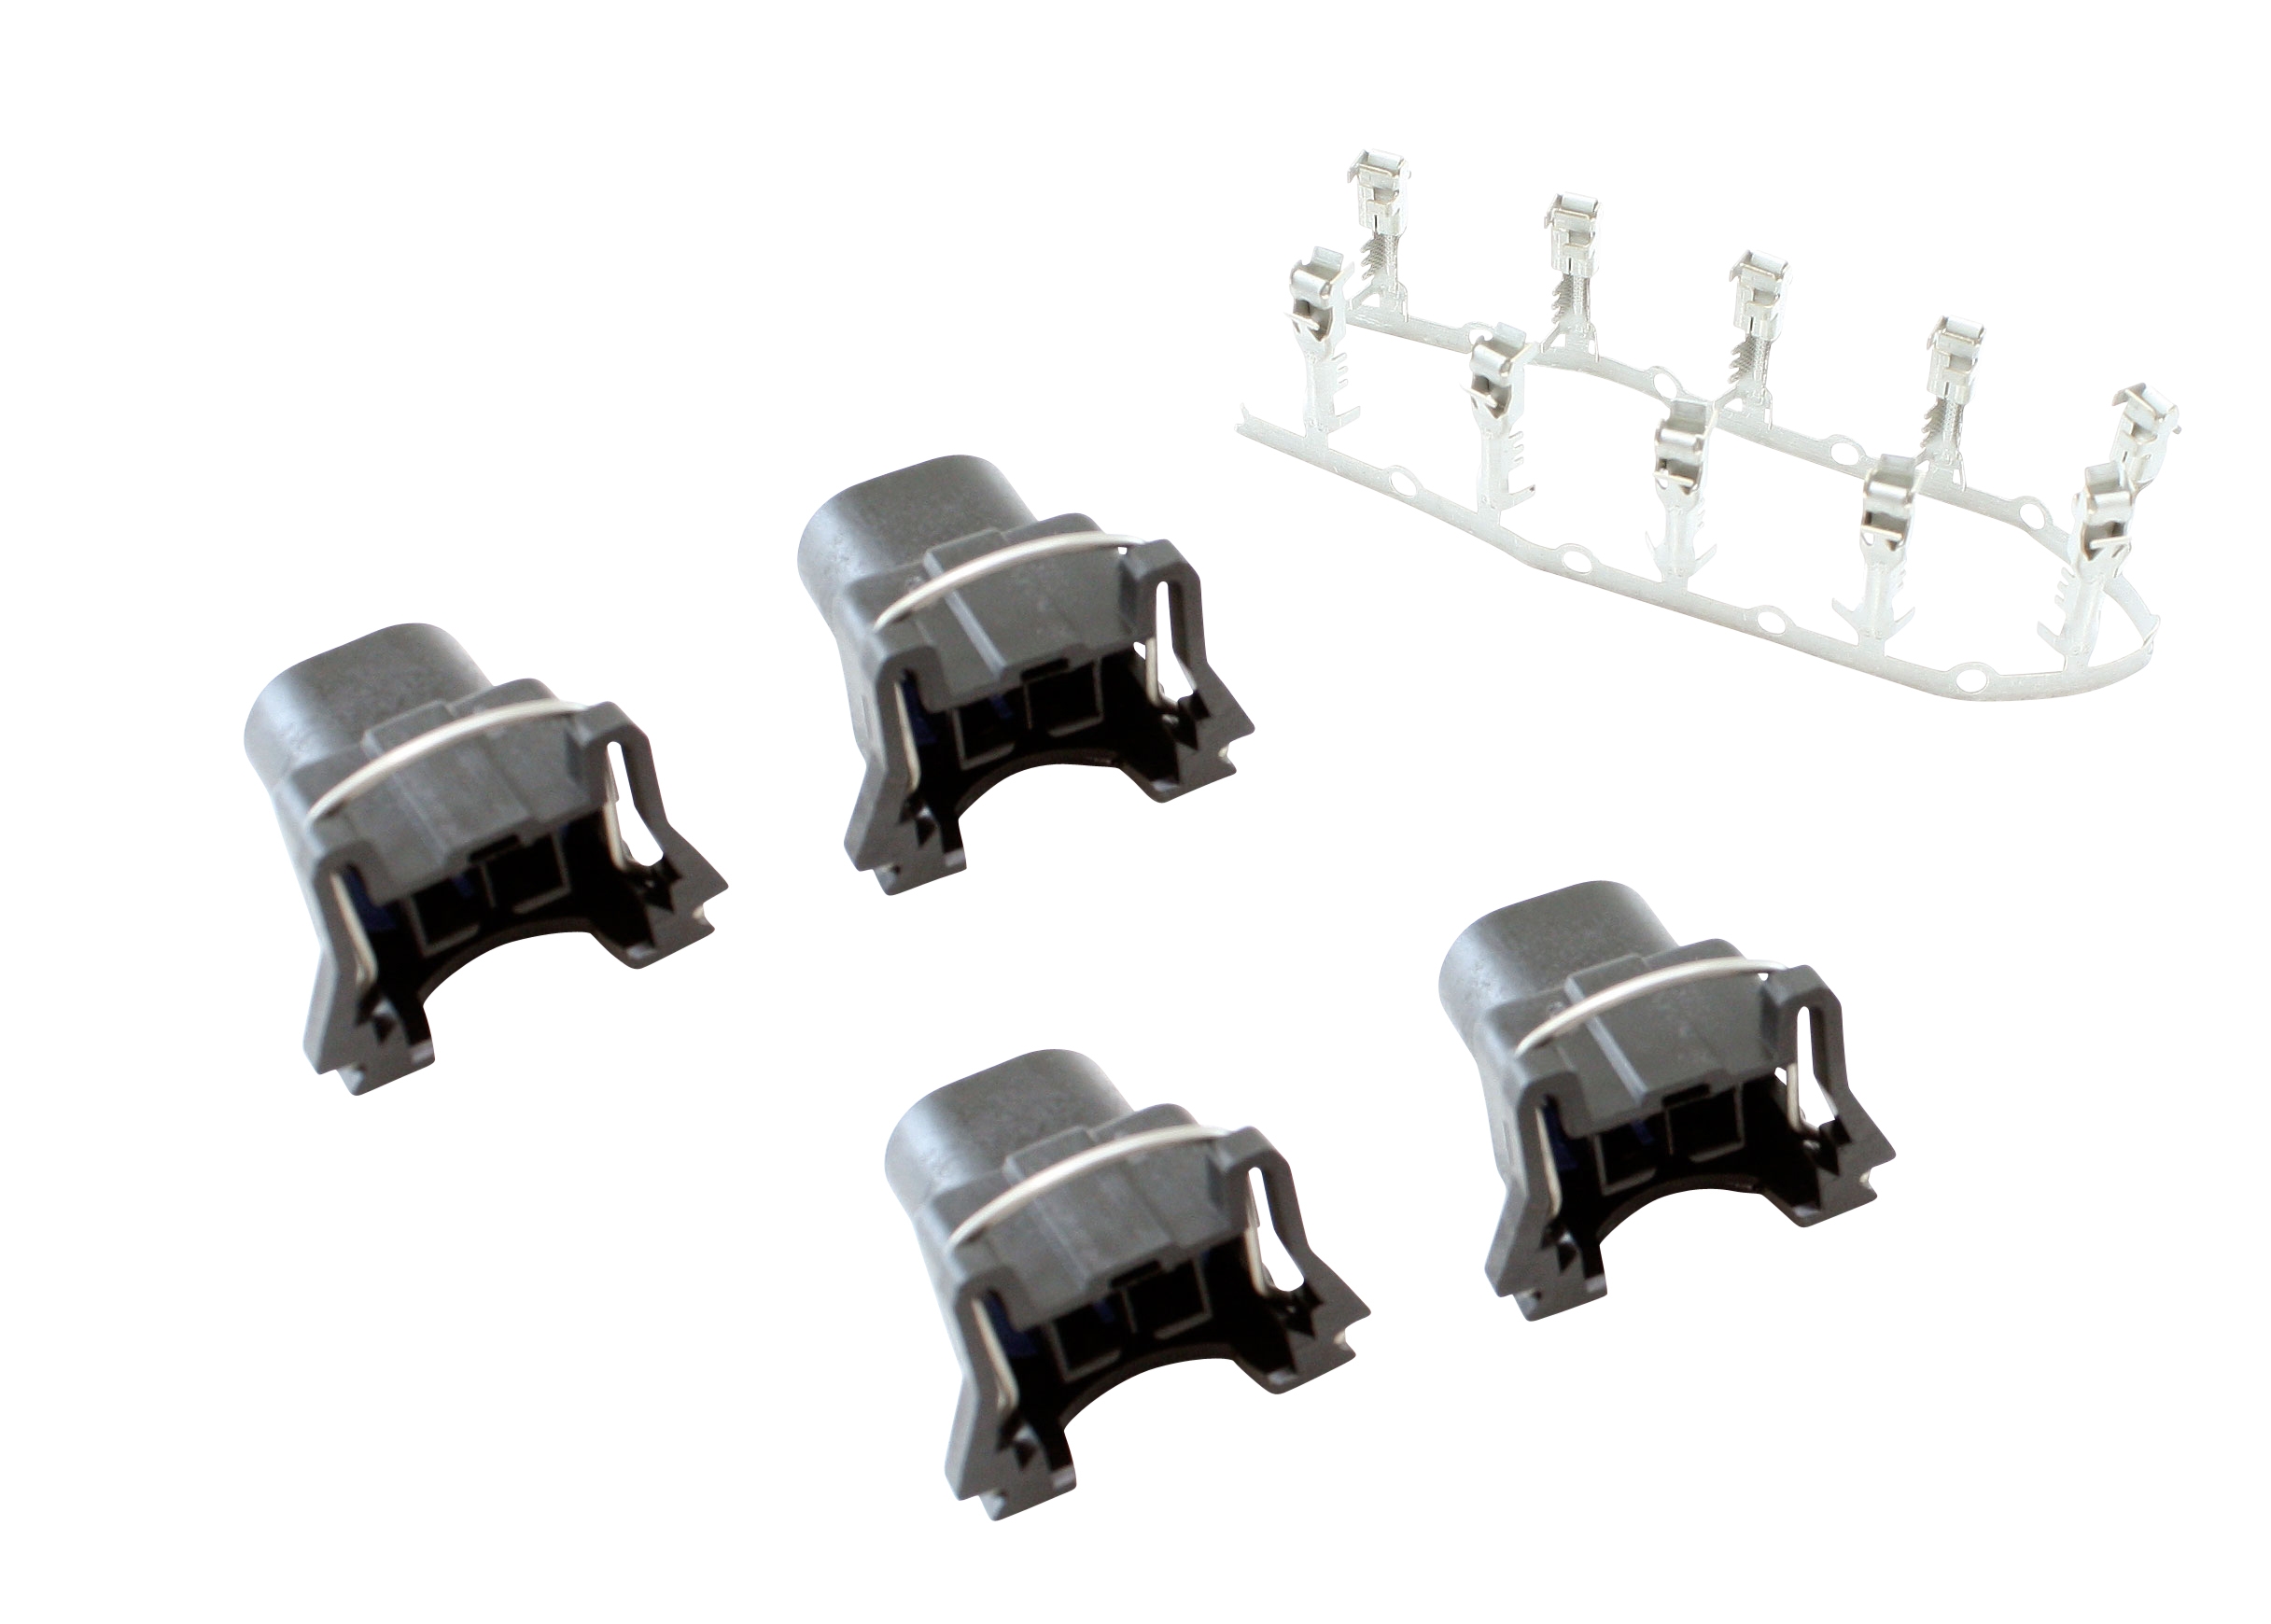 AEM Bosch Injector Plug Kit 4 Pack. Includes: 4 Bosch Injector Connectors & 10 Pins